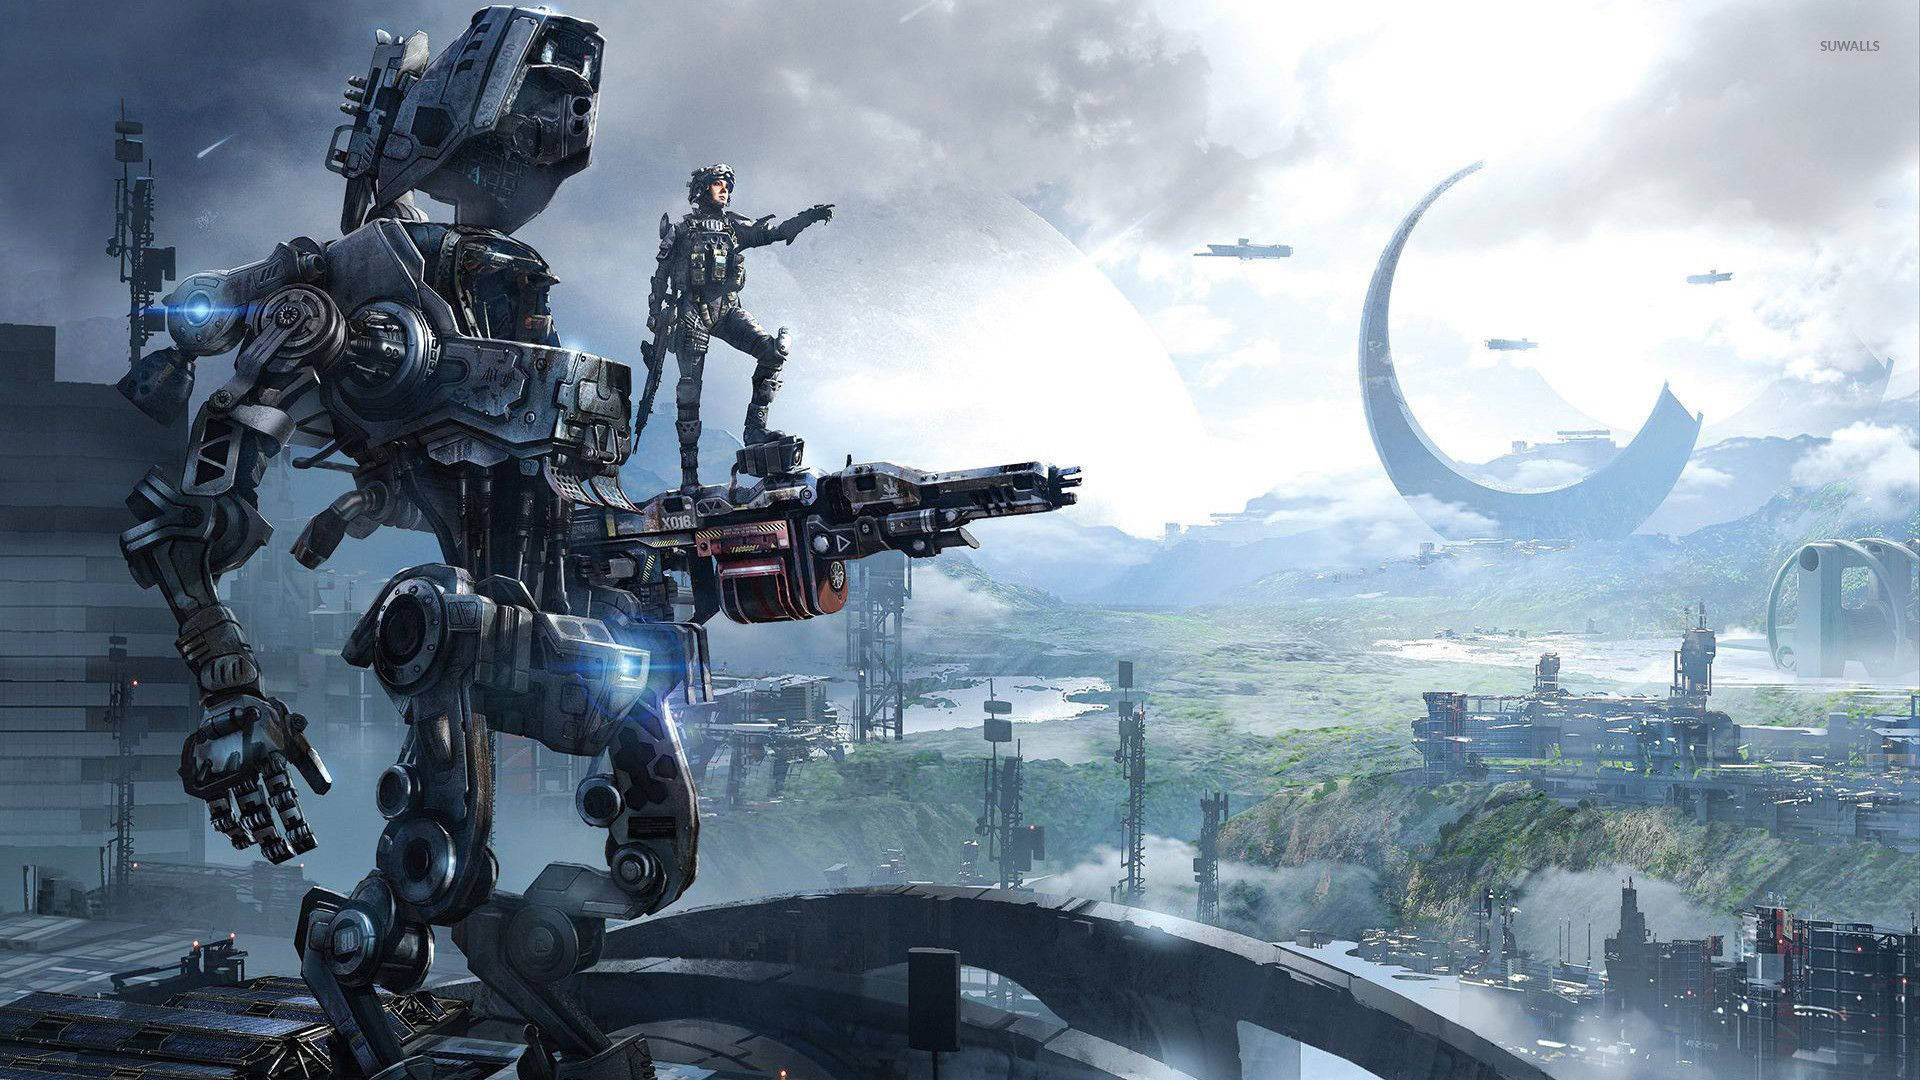 Respawn Solely Created The Titanfall Franchise | Source: EA